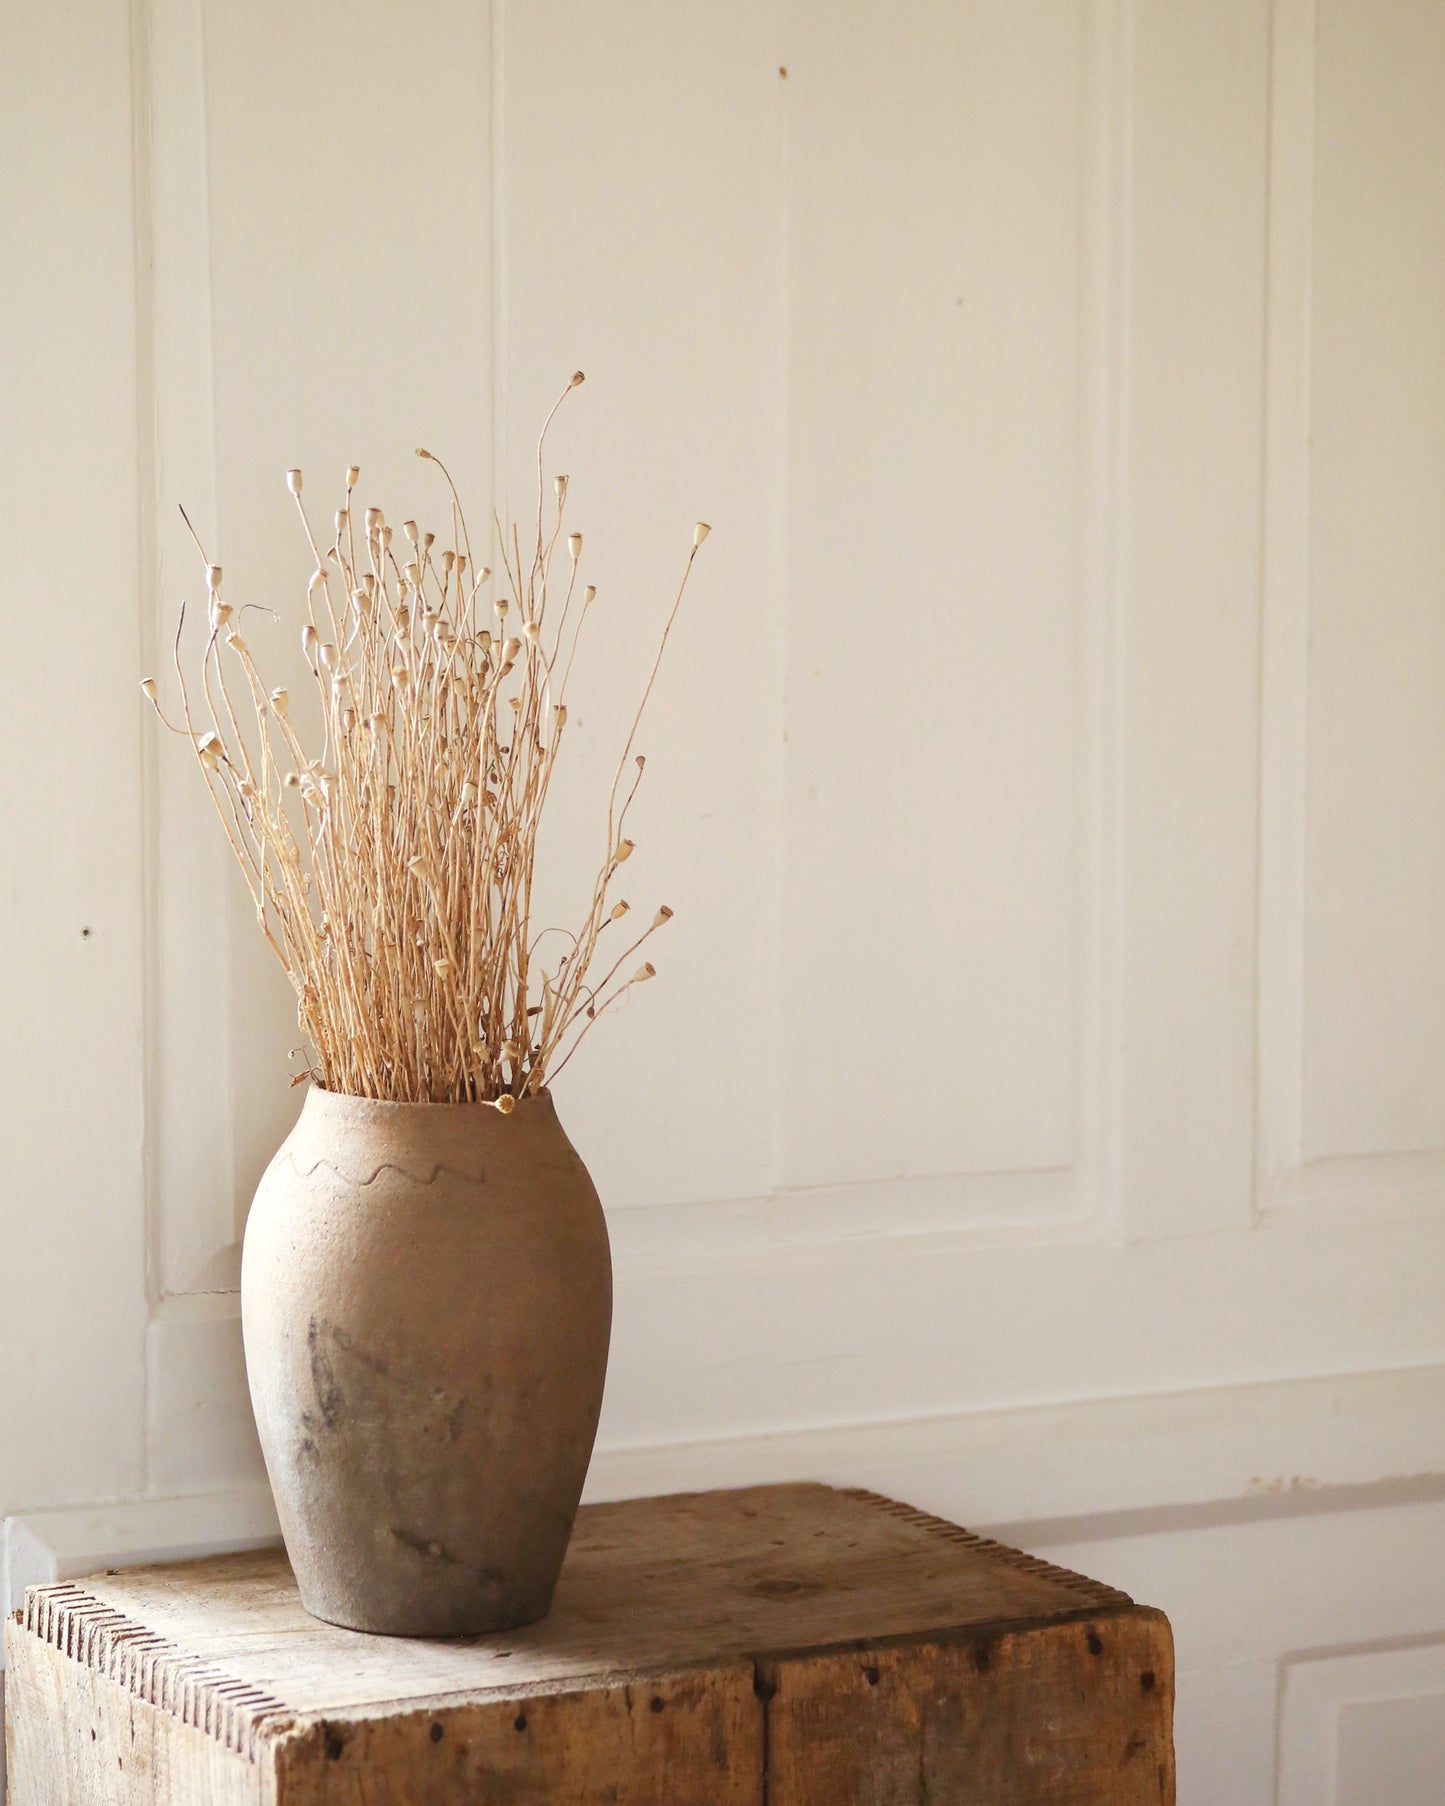 Rustic aged vase displayed with dried flowers